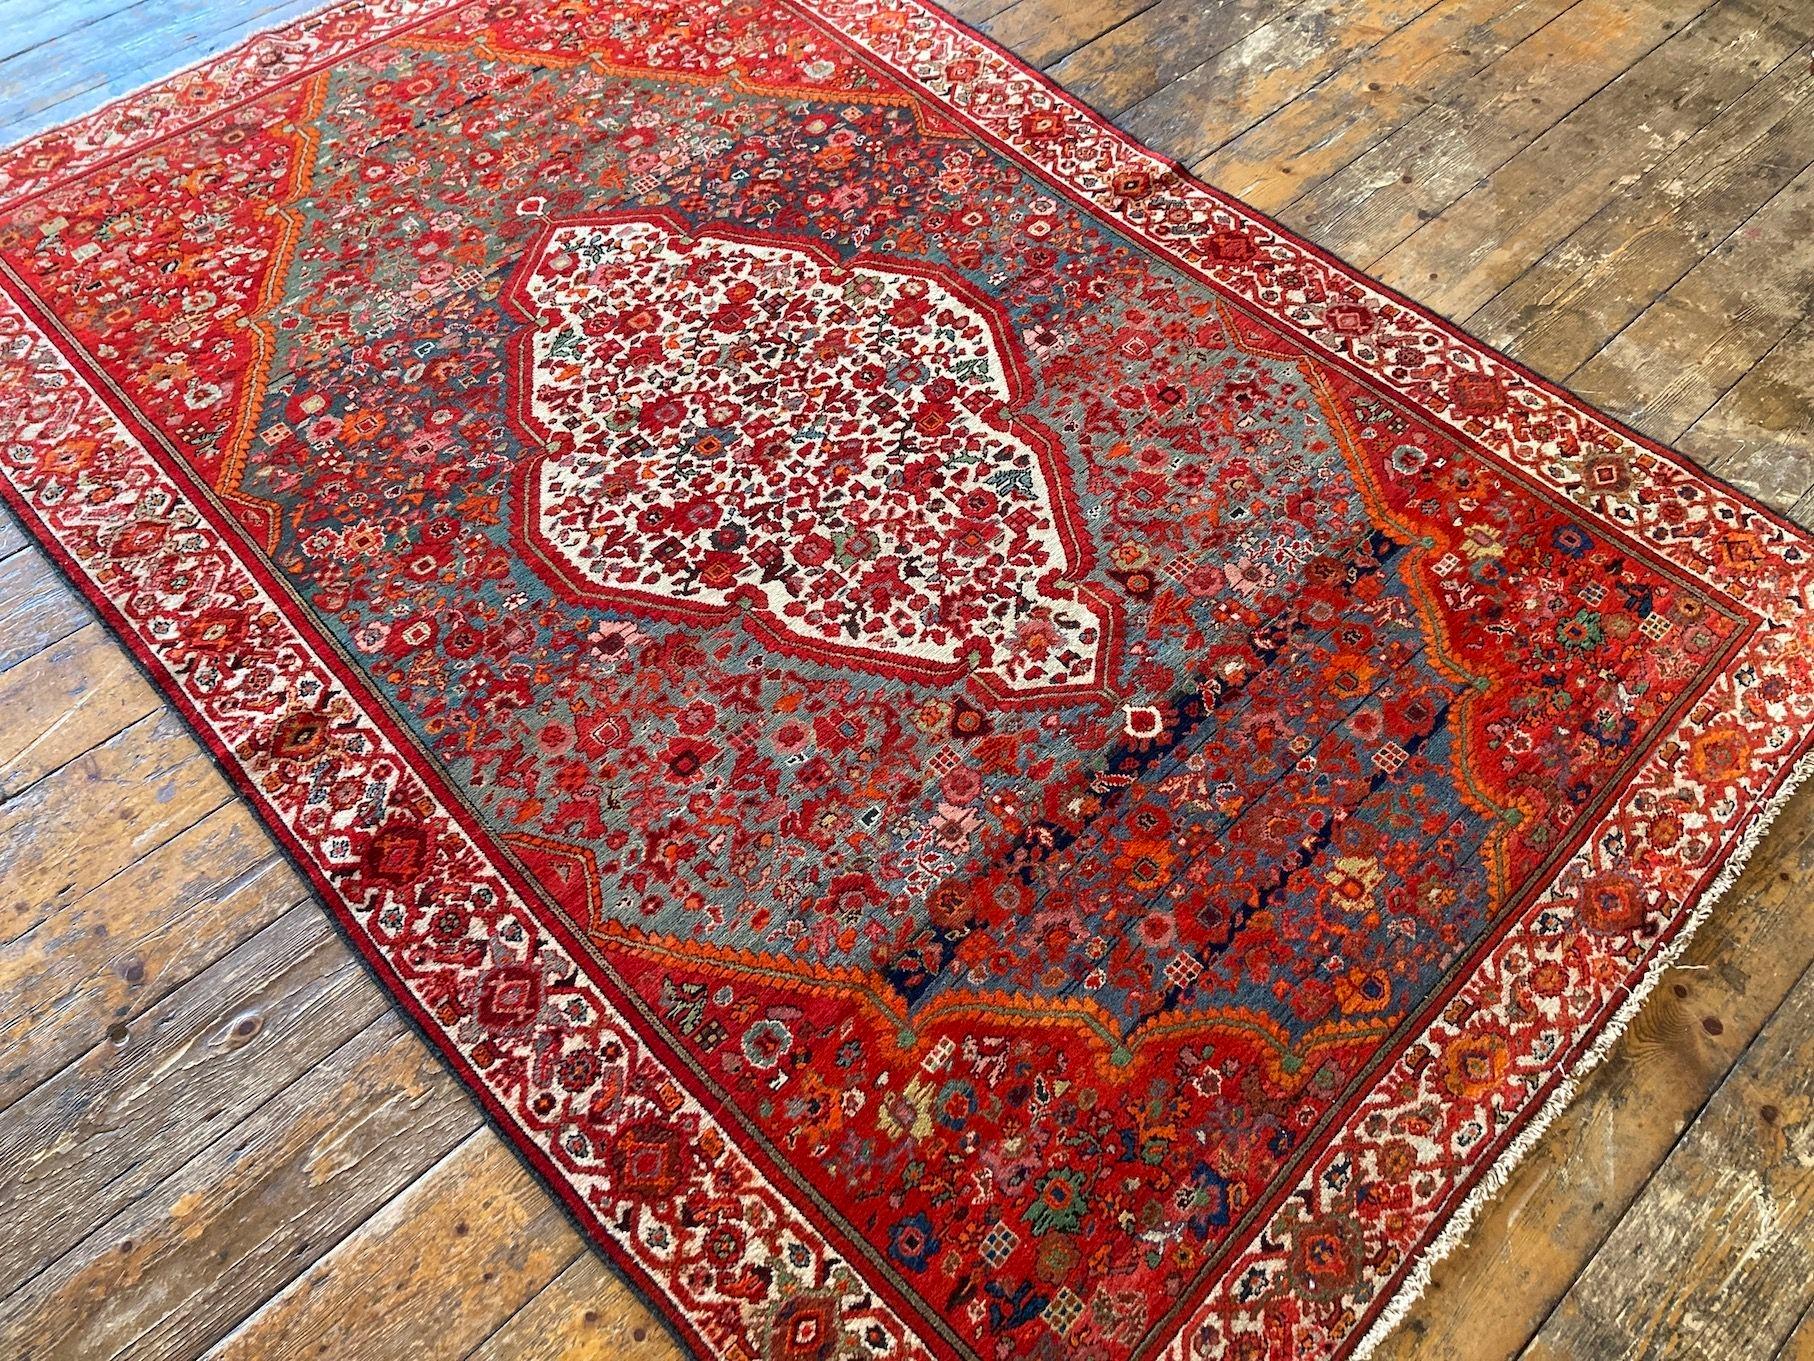 Wool Antique Mishan Malayer Rug 1.98m x 1.32m For Sale